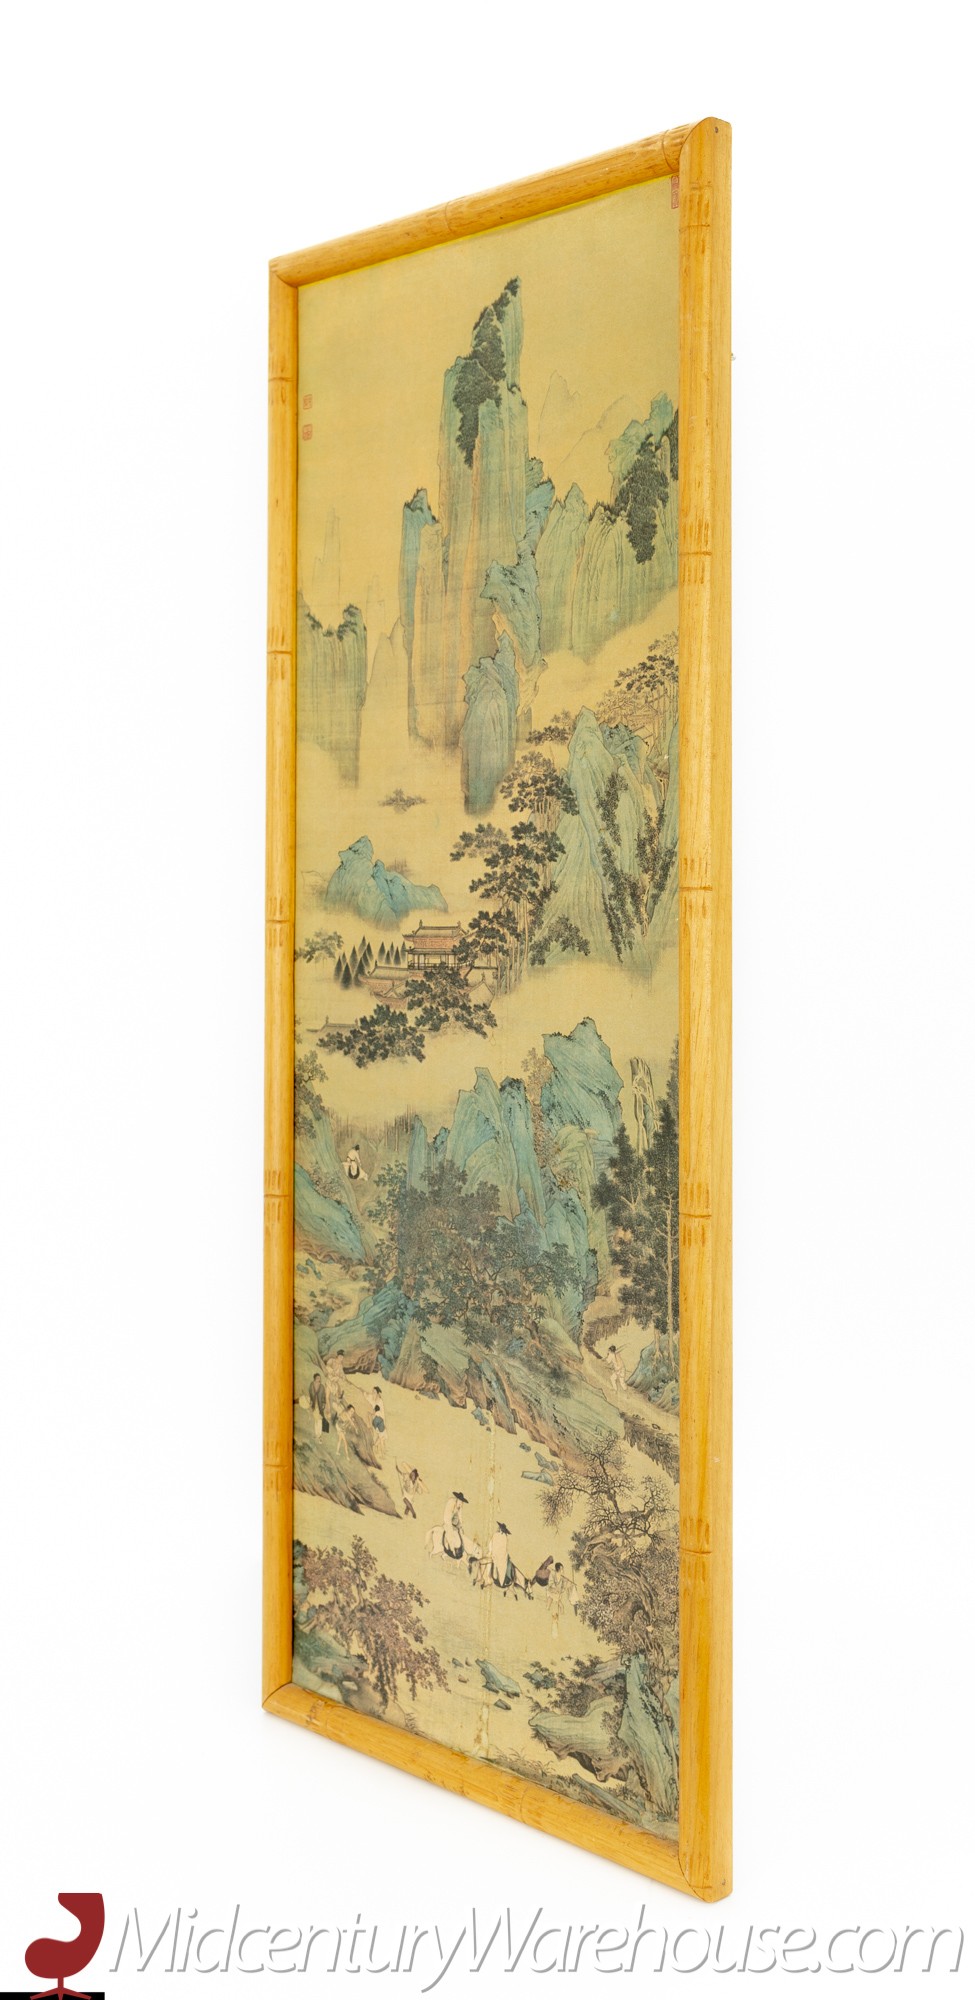 Qiu Ying Chinese Village and Jade Cave Framed Art - 1 of 2